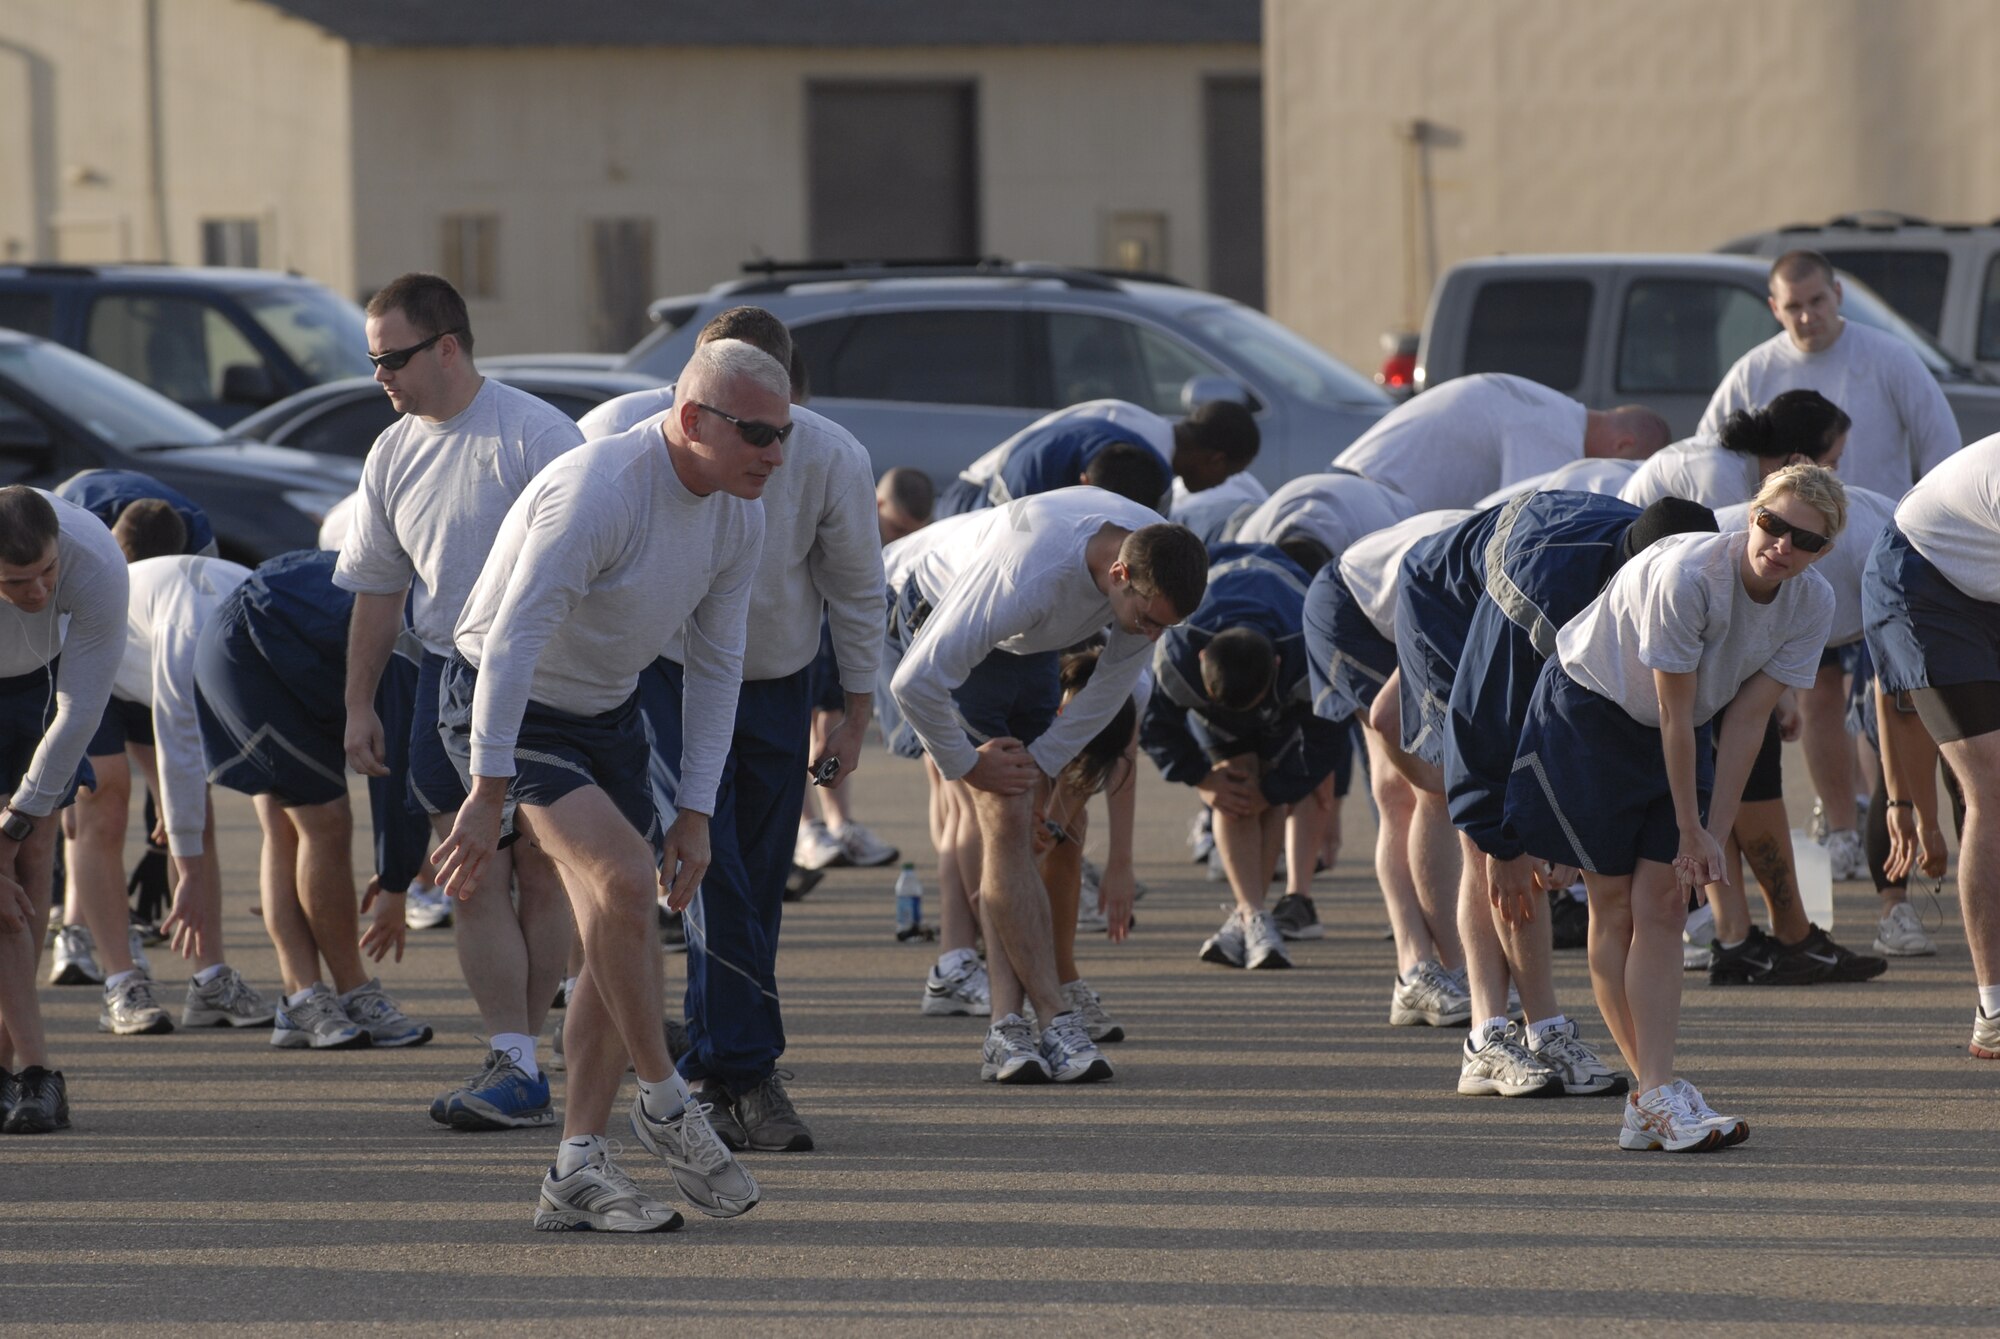 VANDENBERG AIR FORCE BASE, Calif. -- Team V members stretch during the Wing Run at the parade grounds here Tuesday, May 31, 2011.  The 30th WS led the Wing Run before the squadron inactivates on Friday, June 3.  (U.S. Air Force photo/Staff Sgt. Andrew Satran) 

 